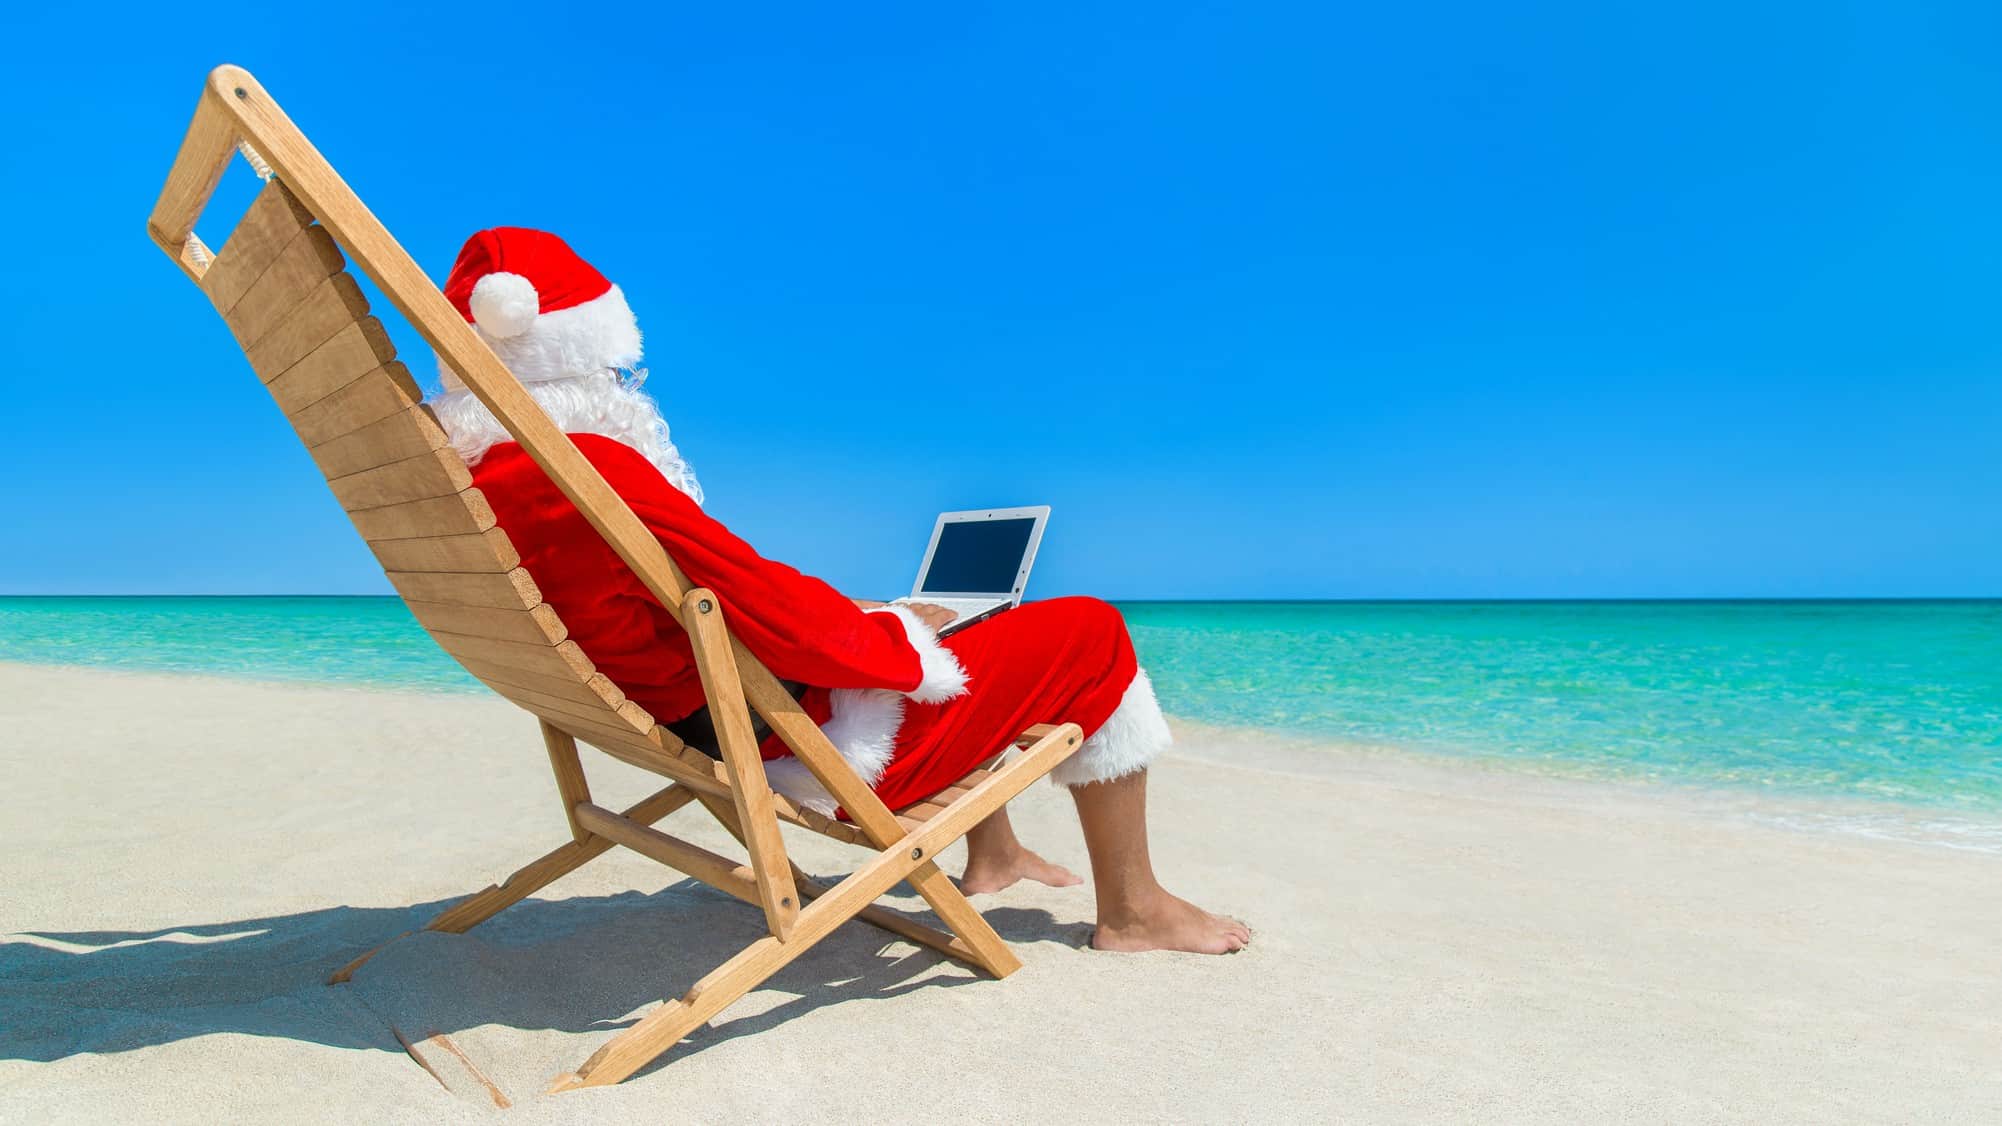 santa sitting on beach looking up best asx shares to buy in december on laptop